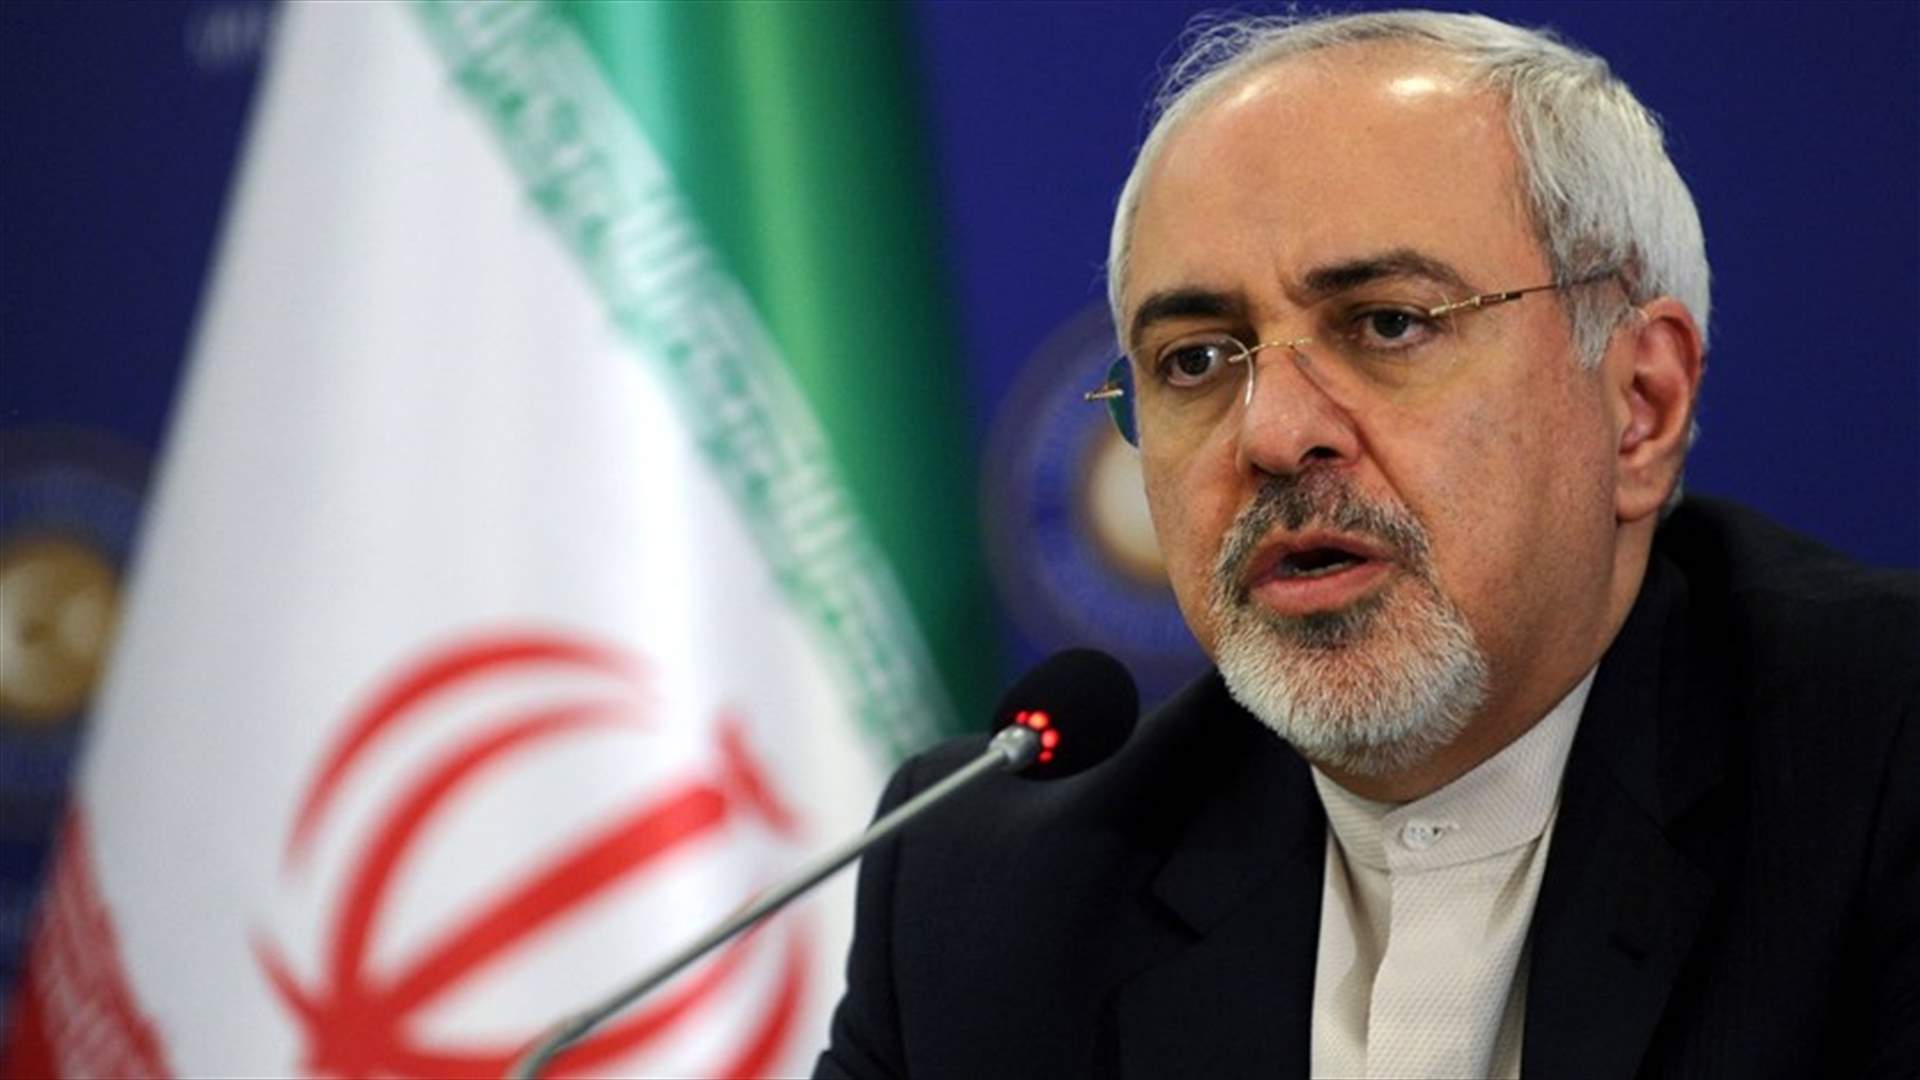 Iran Foreign Minister: would not use ballistic missiles to attack any other country